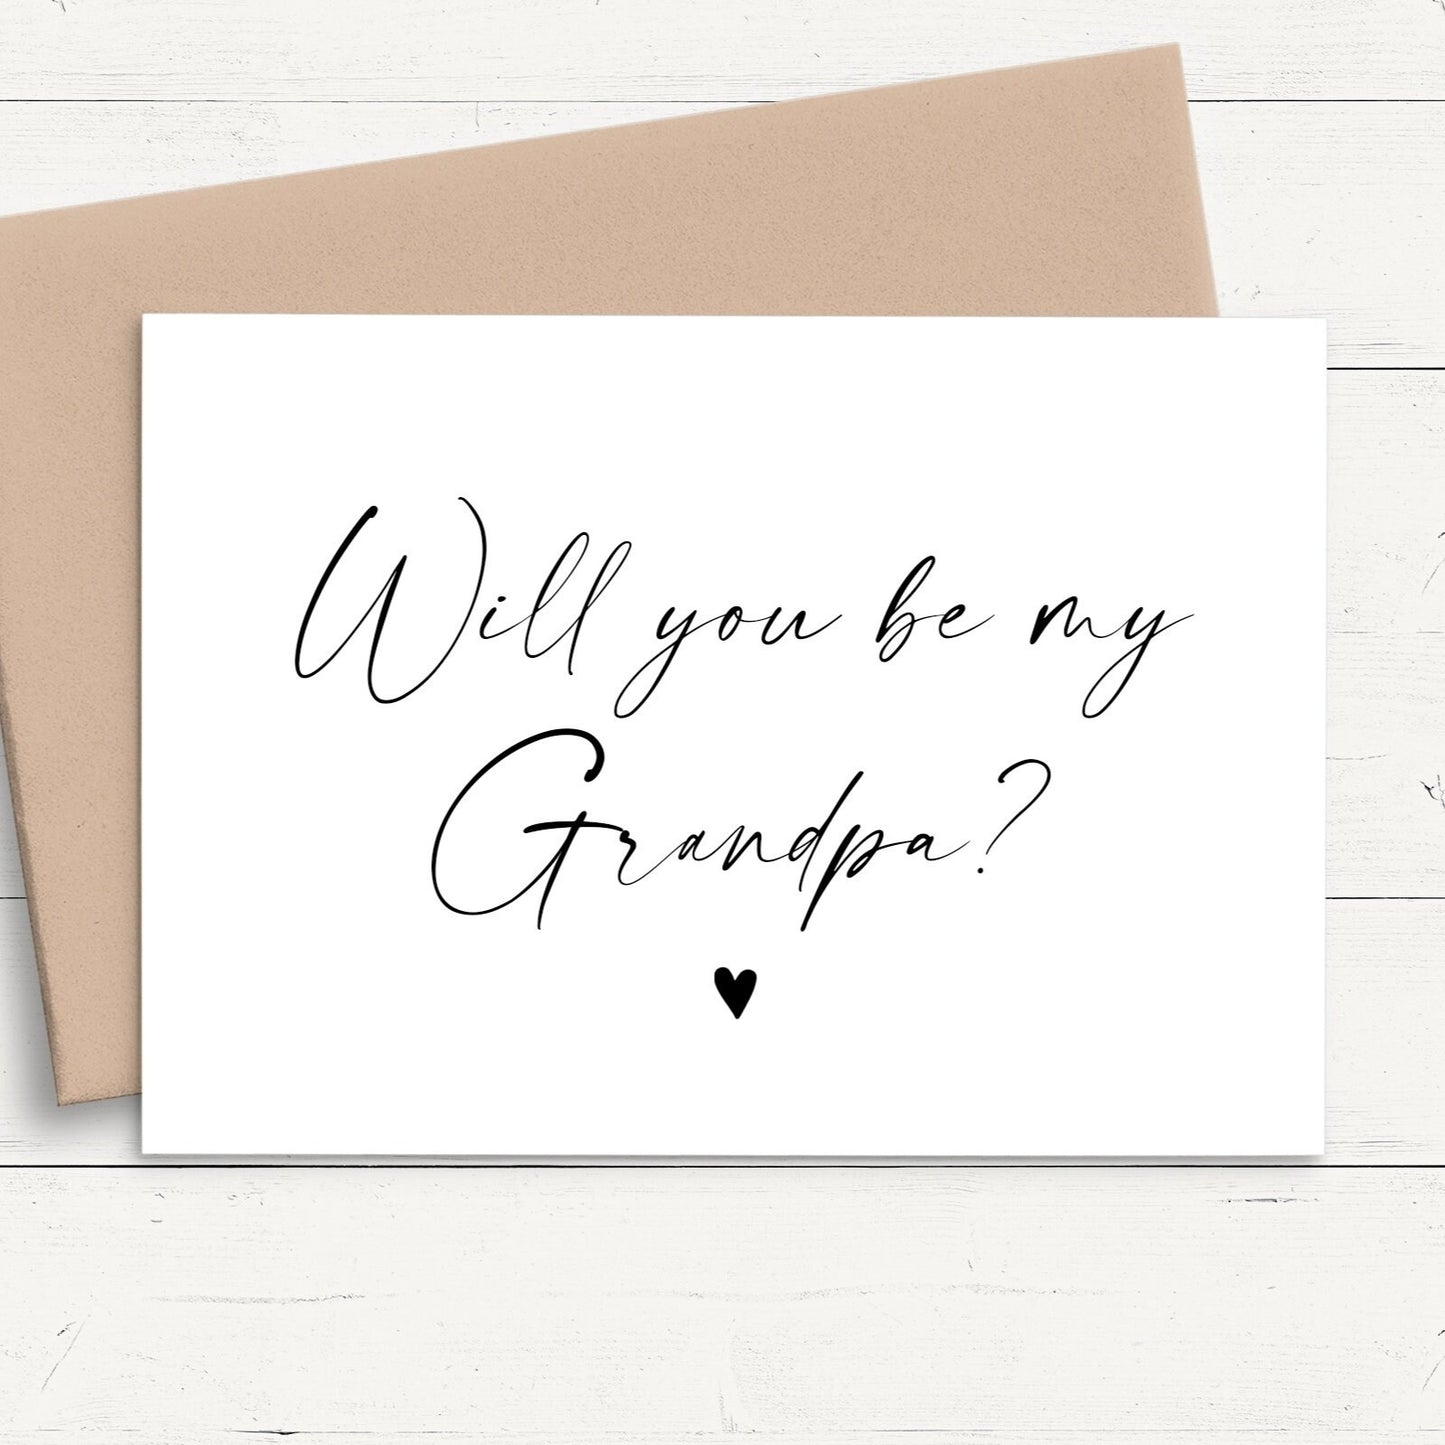 will you be my grandpa pregnancy announcement card dad personalised matte white cardstock kraft brown envelope